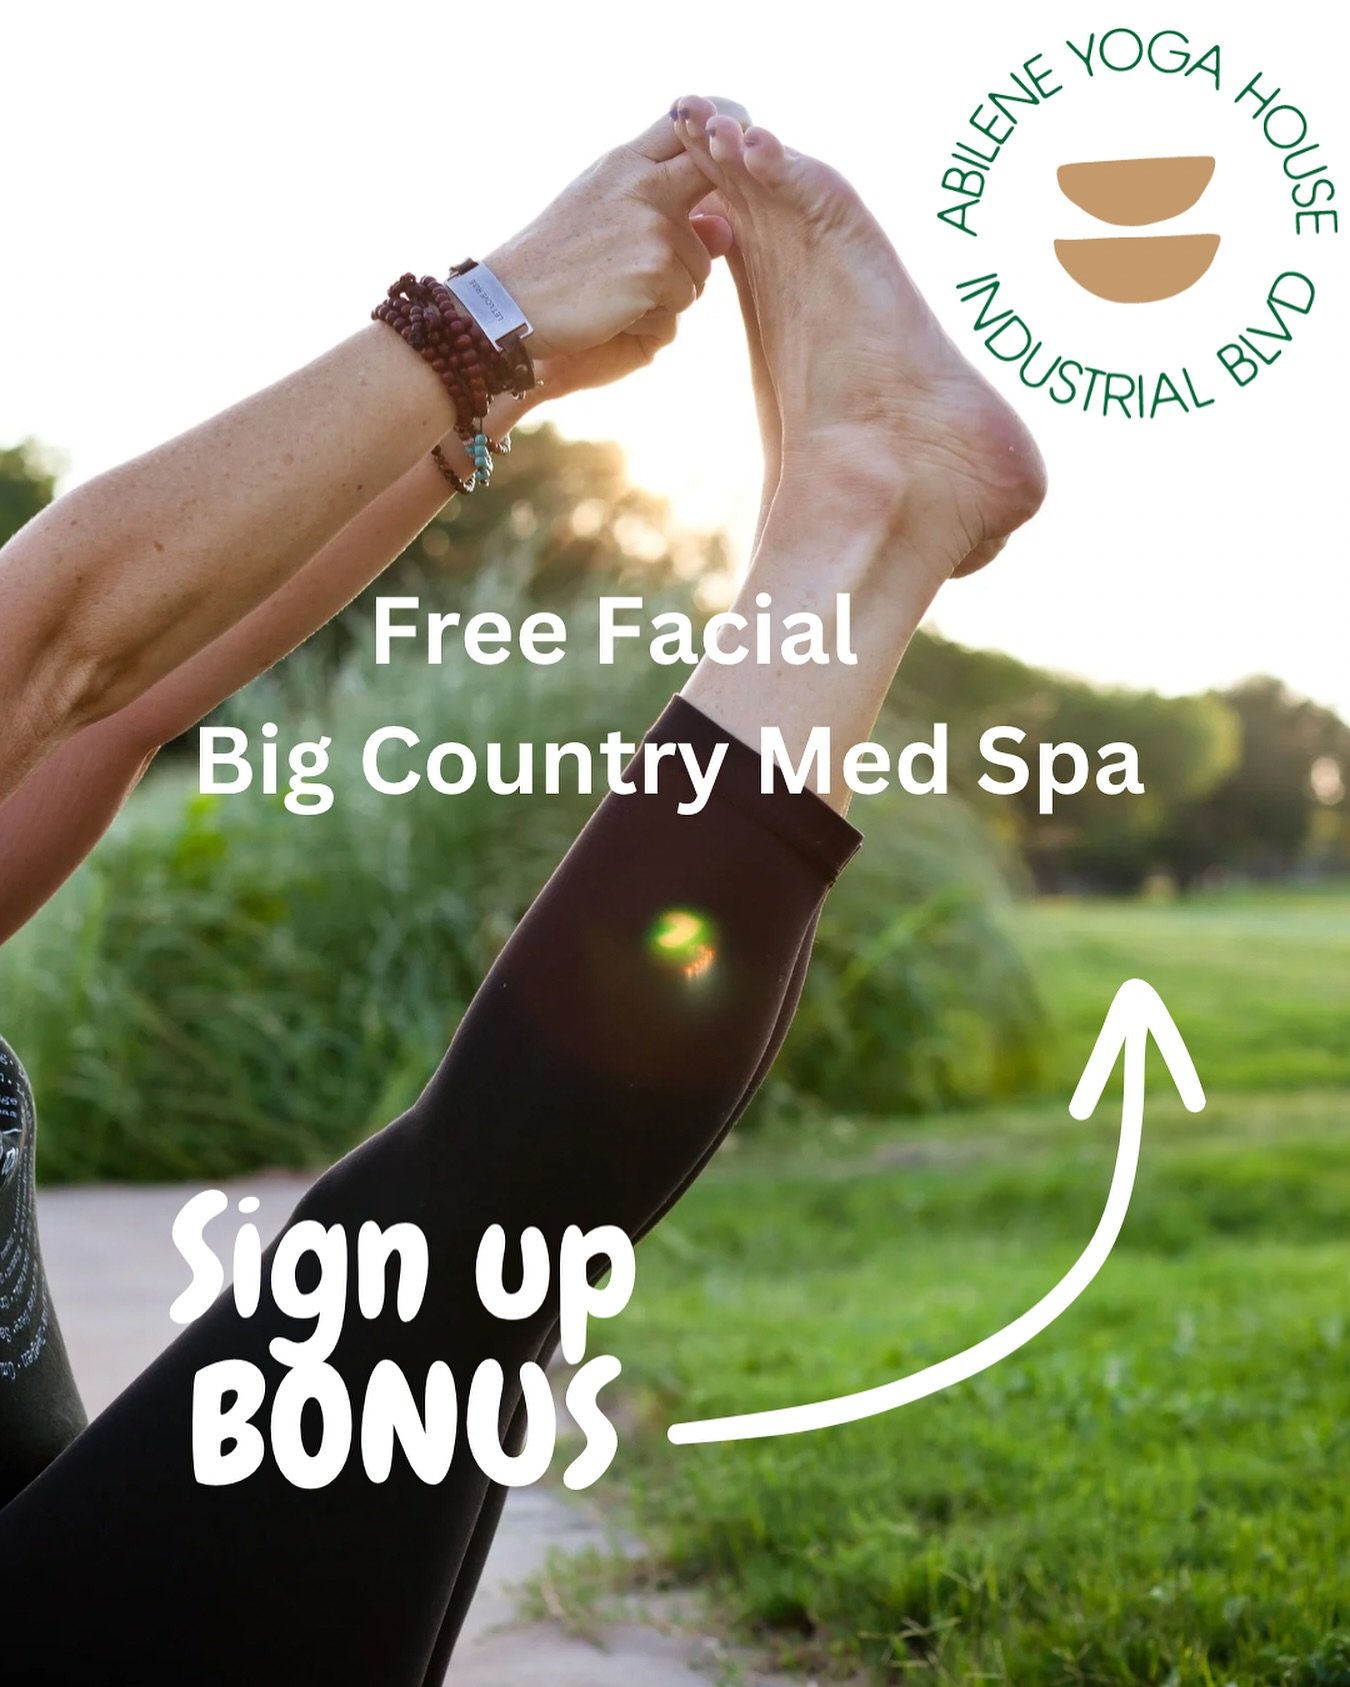 Sign up for our unlimited yoga package (14 classes per week offering morning , noon, evening and weekend classes)
Get a free facial from @bigcountrymedspa ! 

Connection to a community is vital these days and why not do it with like minded people. Ho